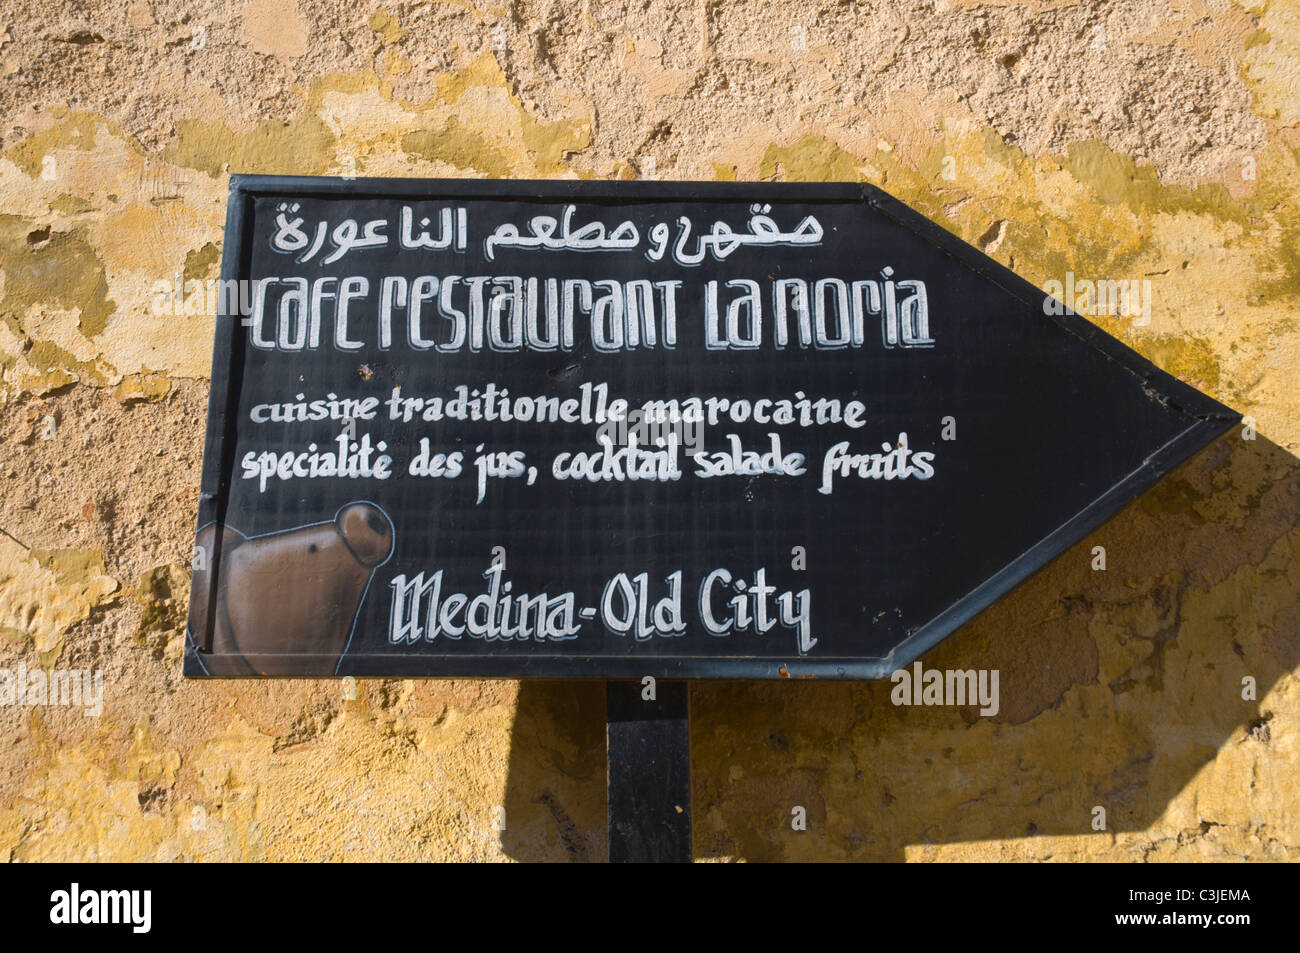 Cafe restaurant La Noria sign Medina old town Fez northern Morocco Africa Stock Photo